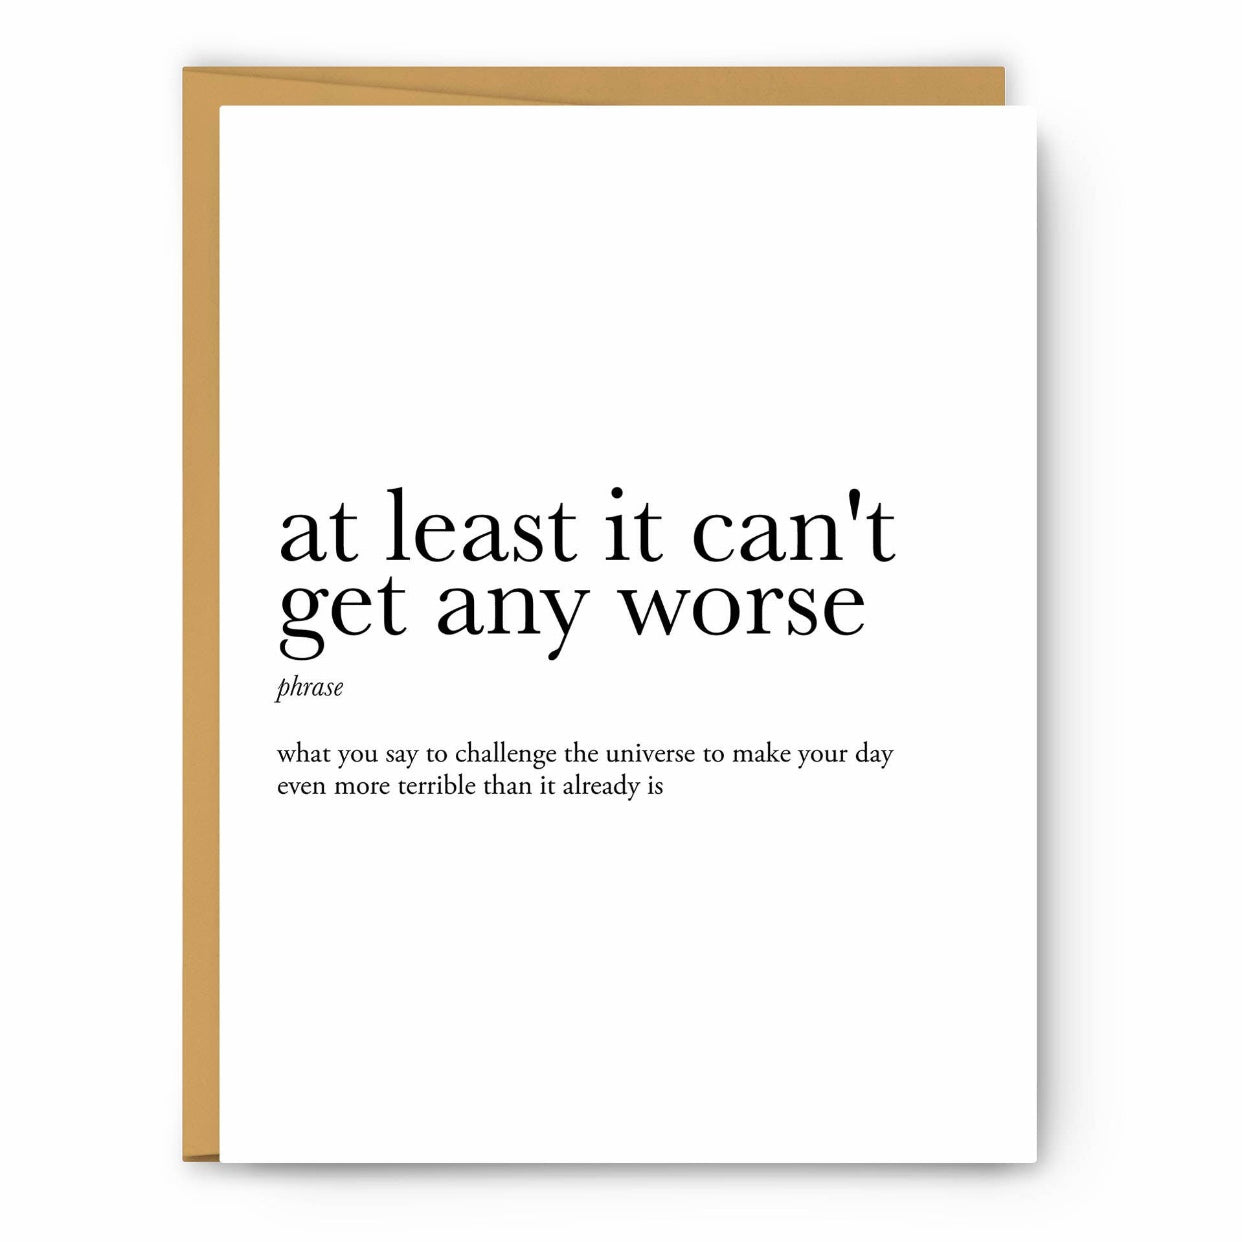 at least it can't get worse greeting card